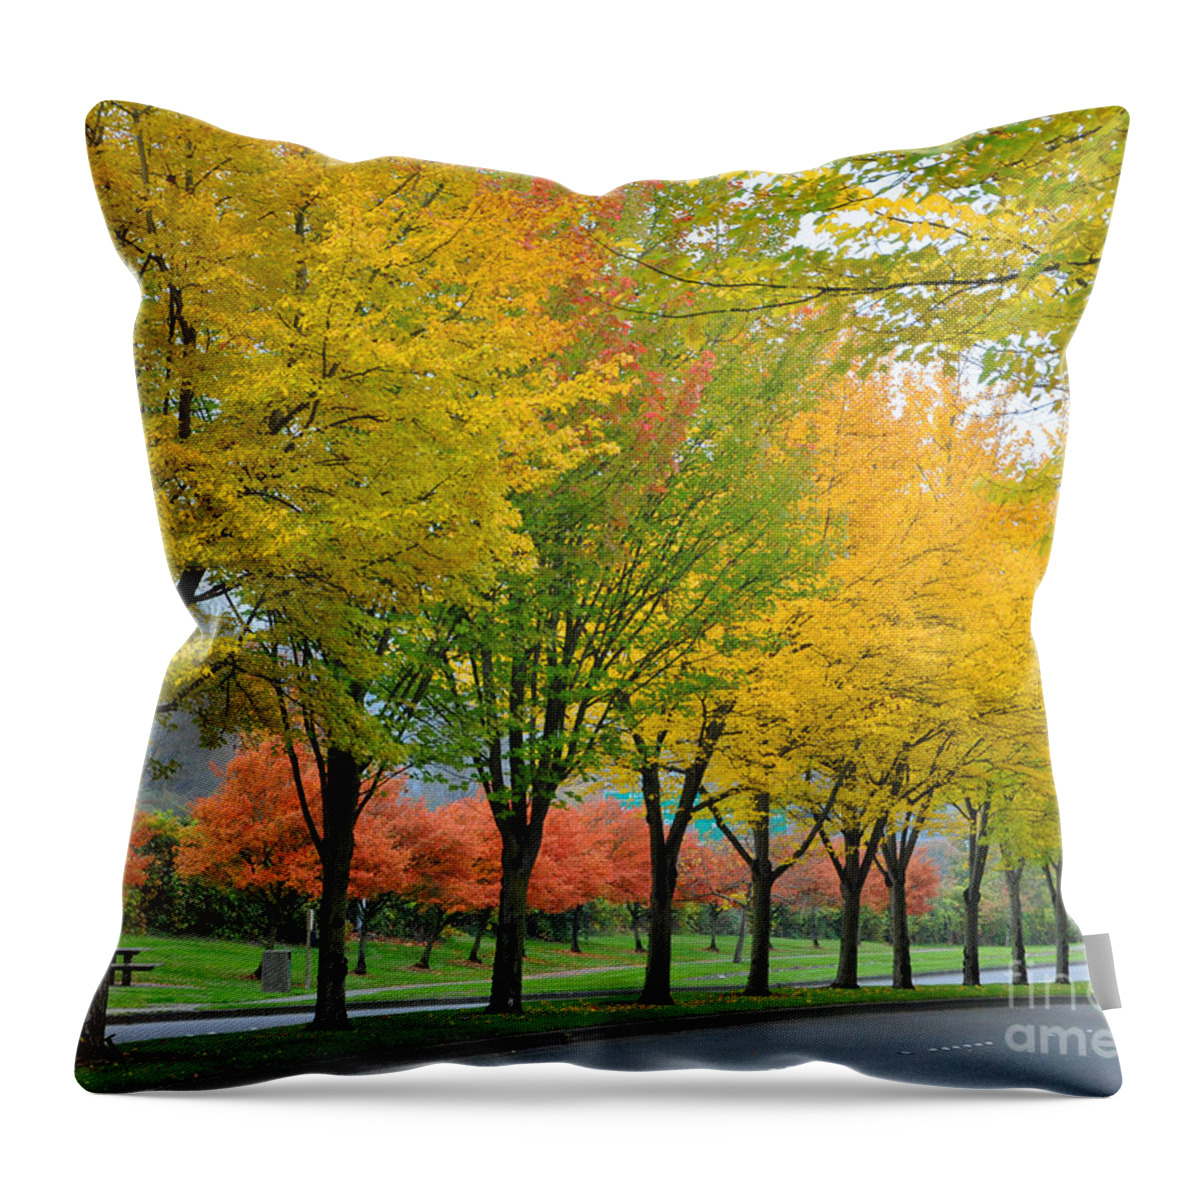 Fall Throw Pillow featuring the photograph Row Of Trees by Kirt Tisdale